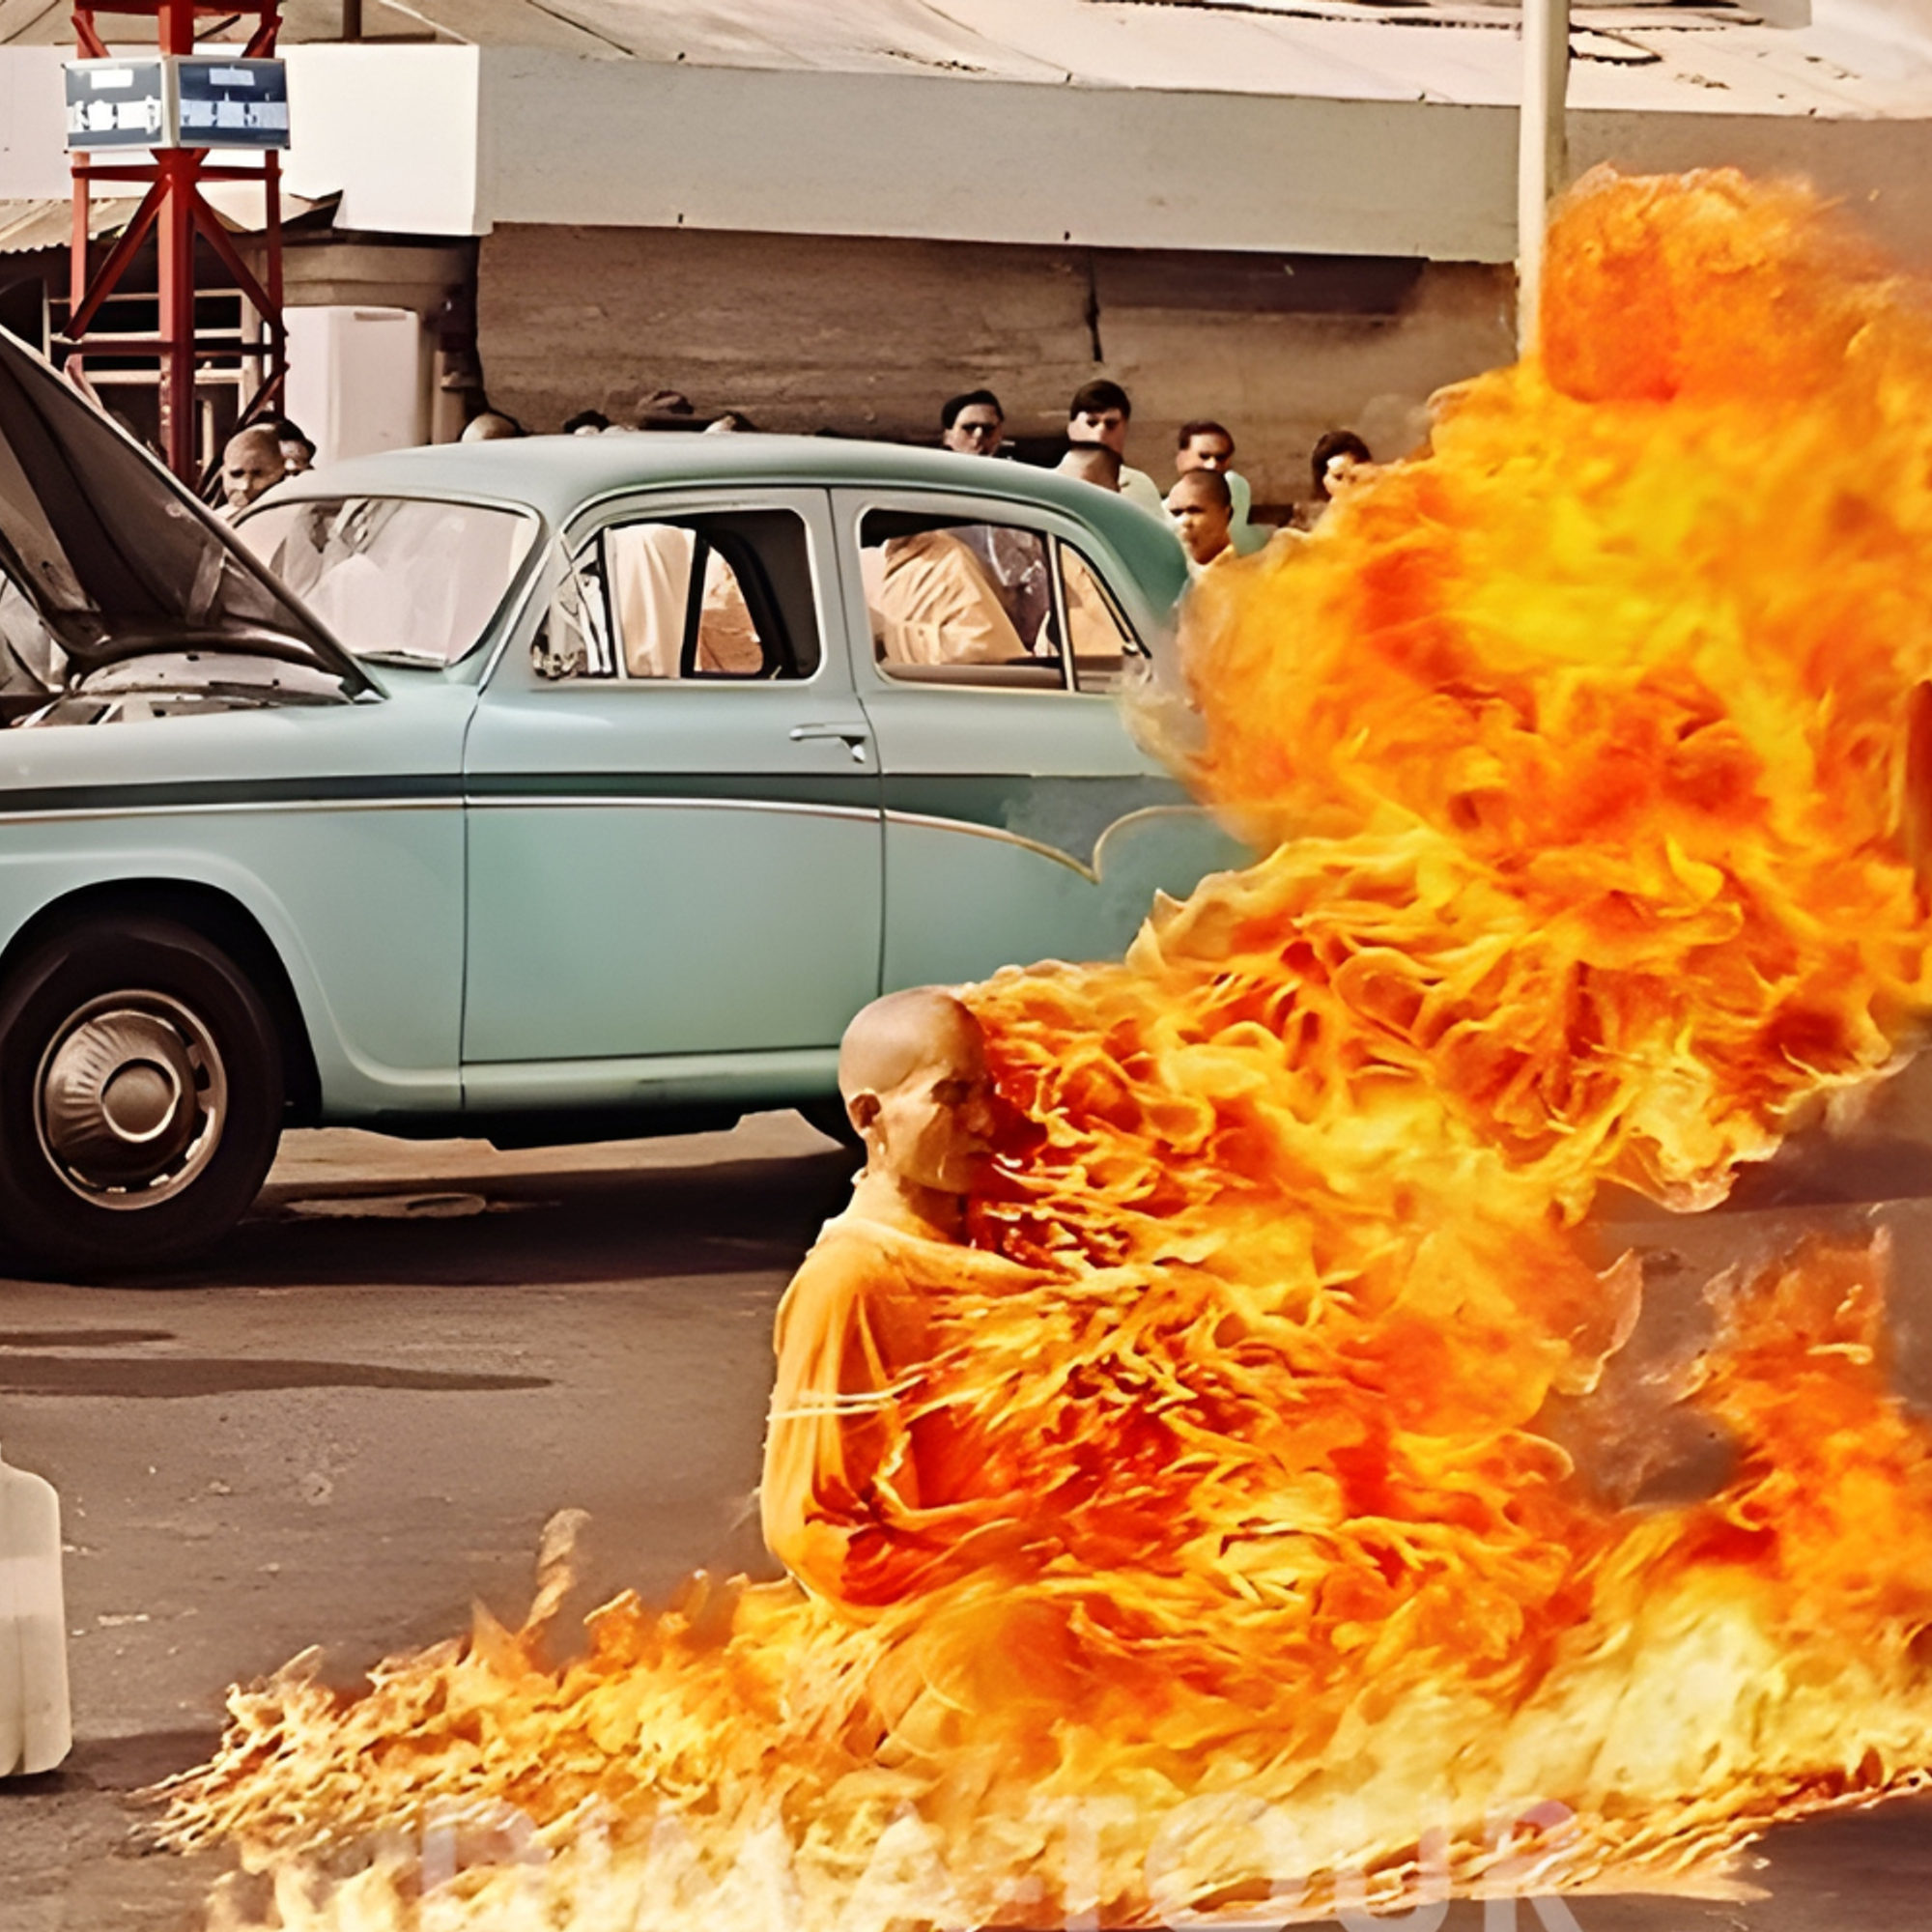 Thich Quang Duc: The Burning Monk's Fight for Change